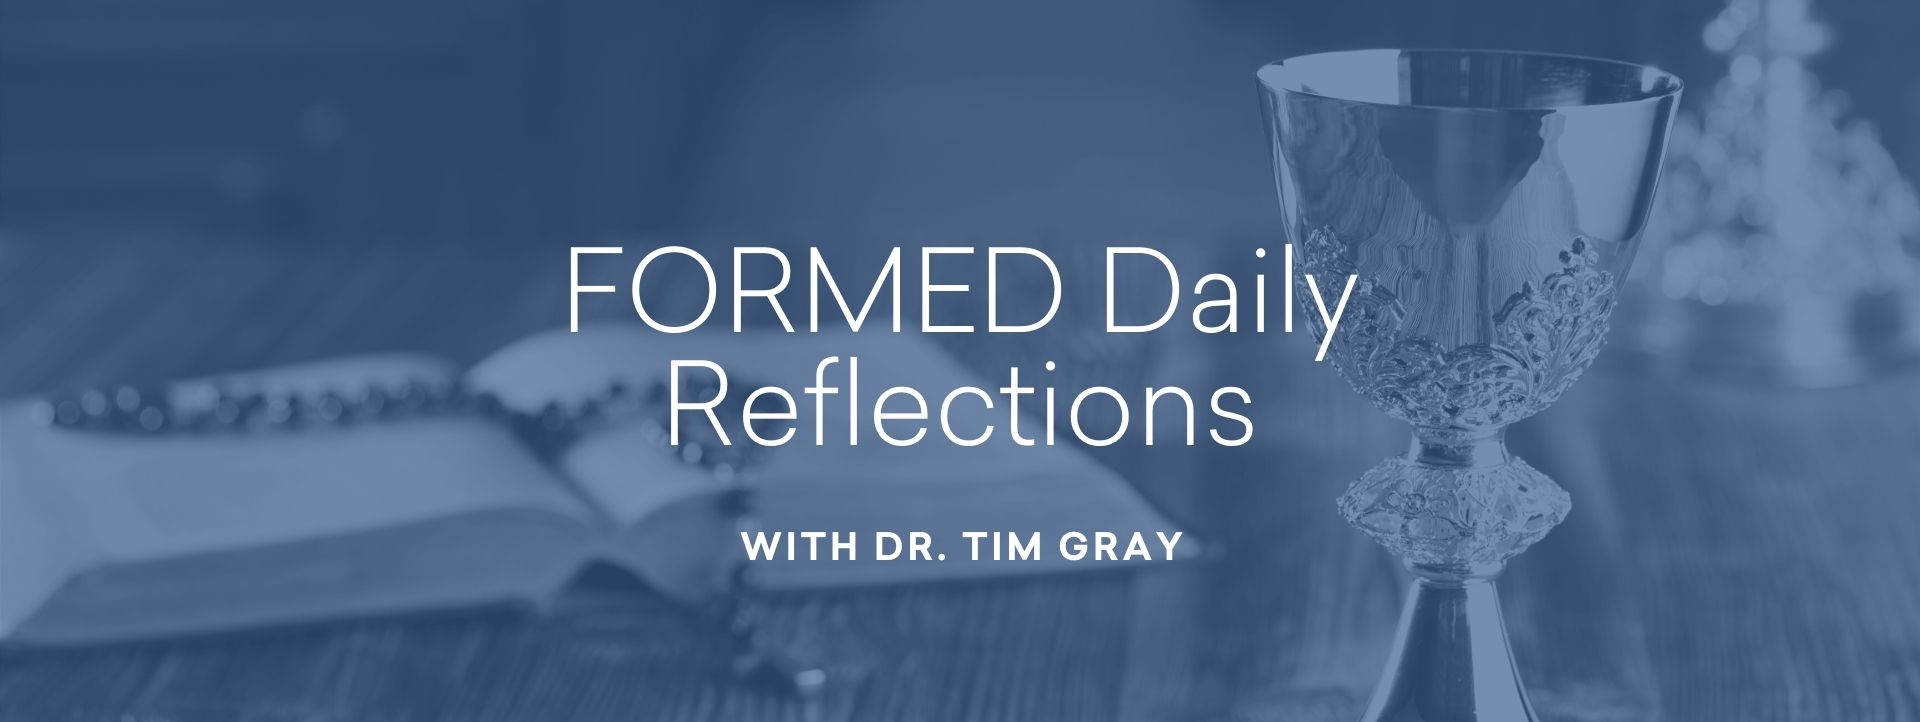 daily reflections today